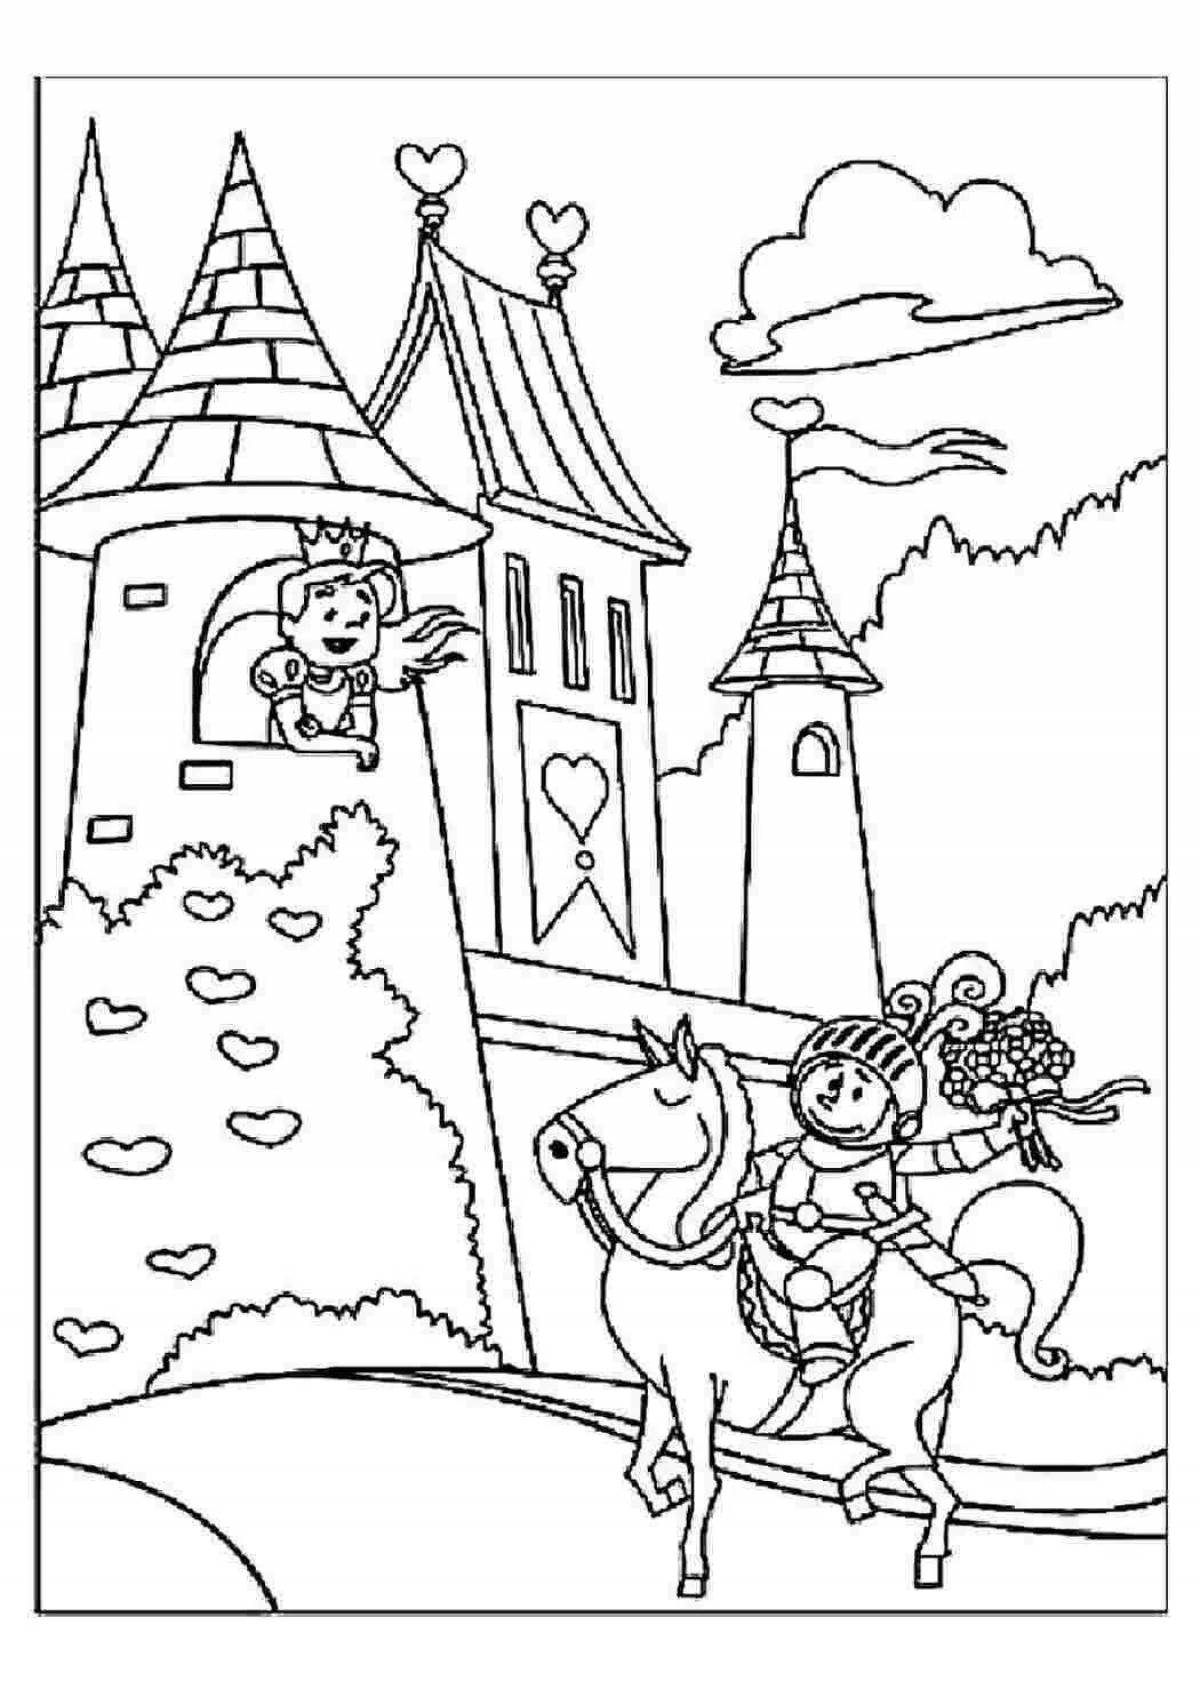 Fine castles coloring book for girls